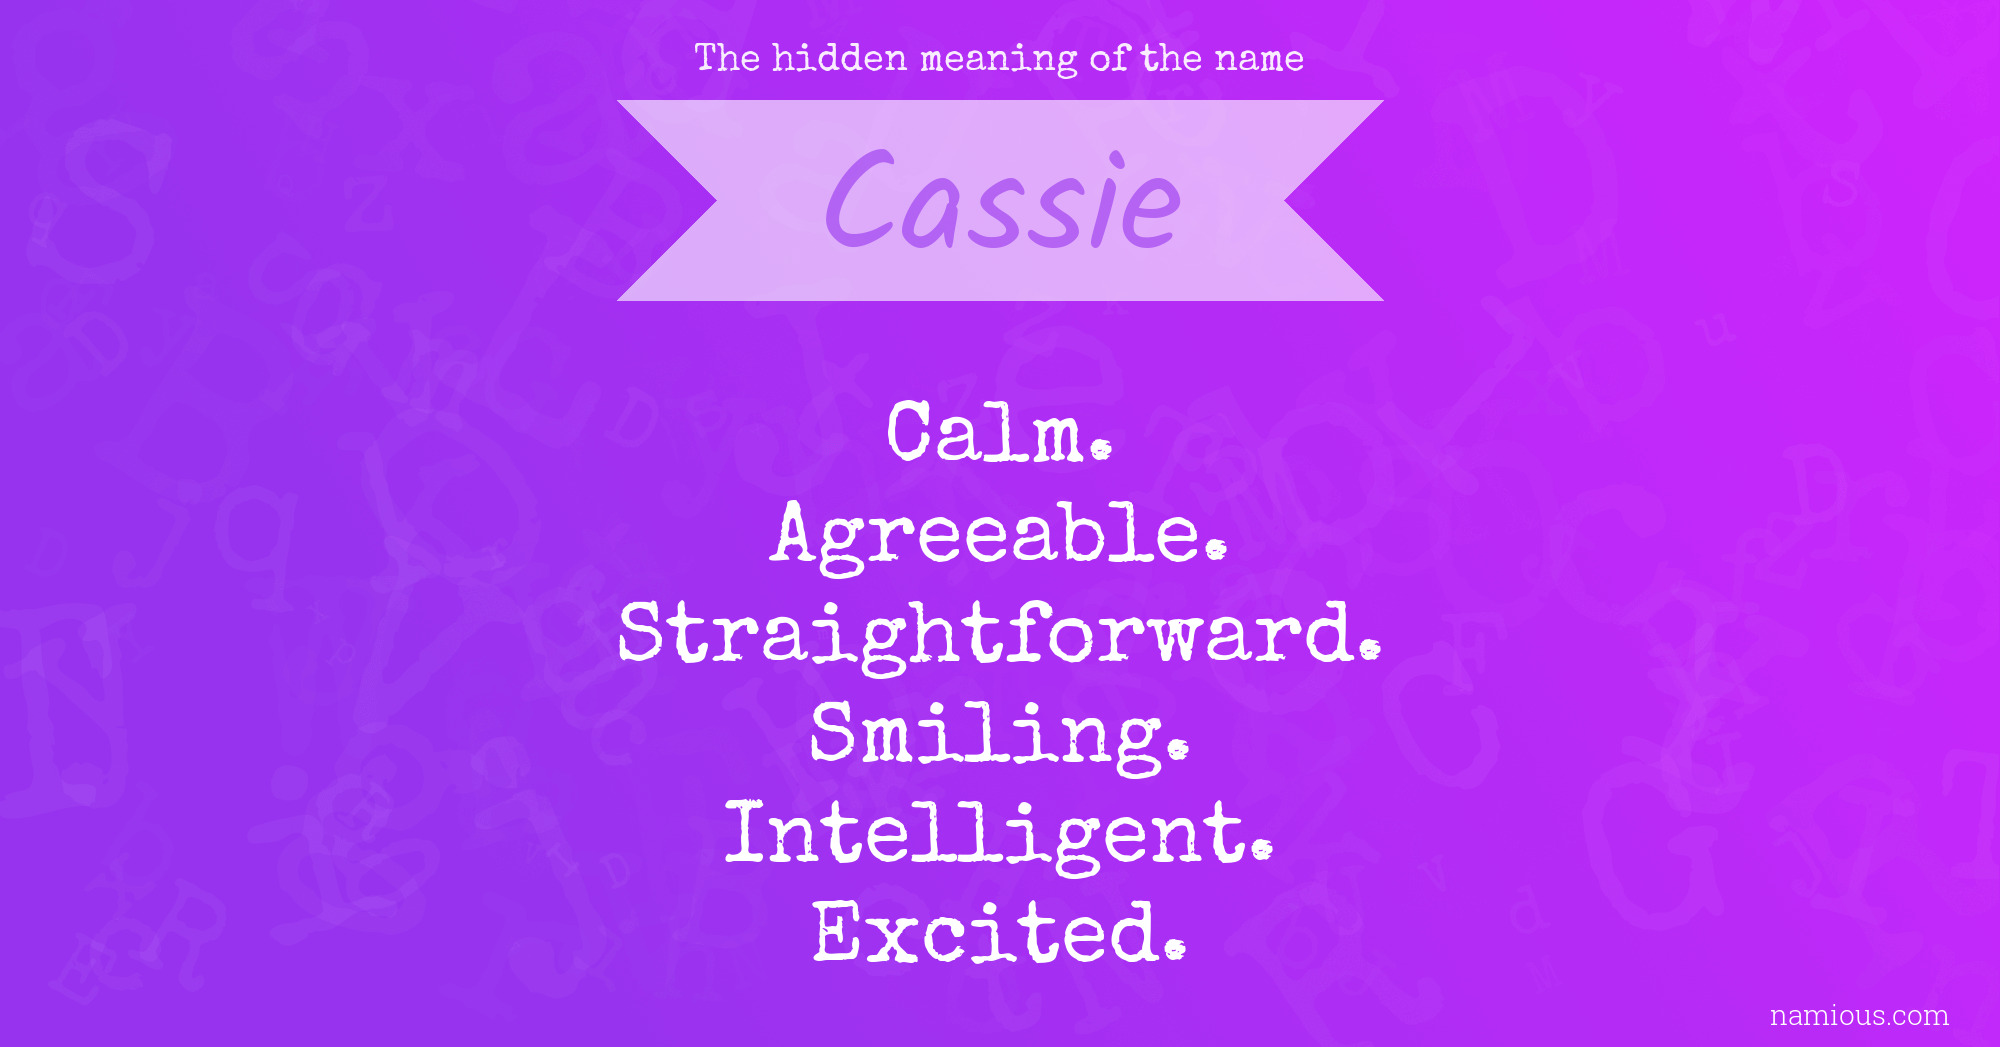 The hidden meaning of the name Cassie